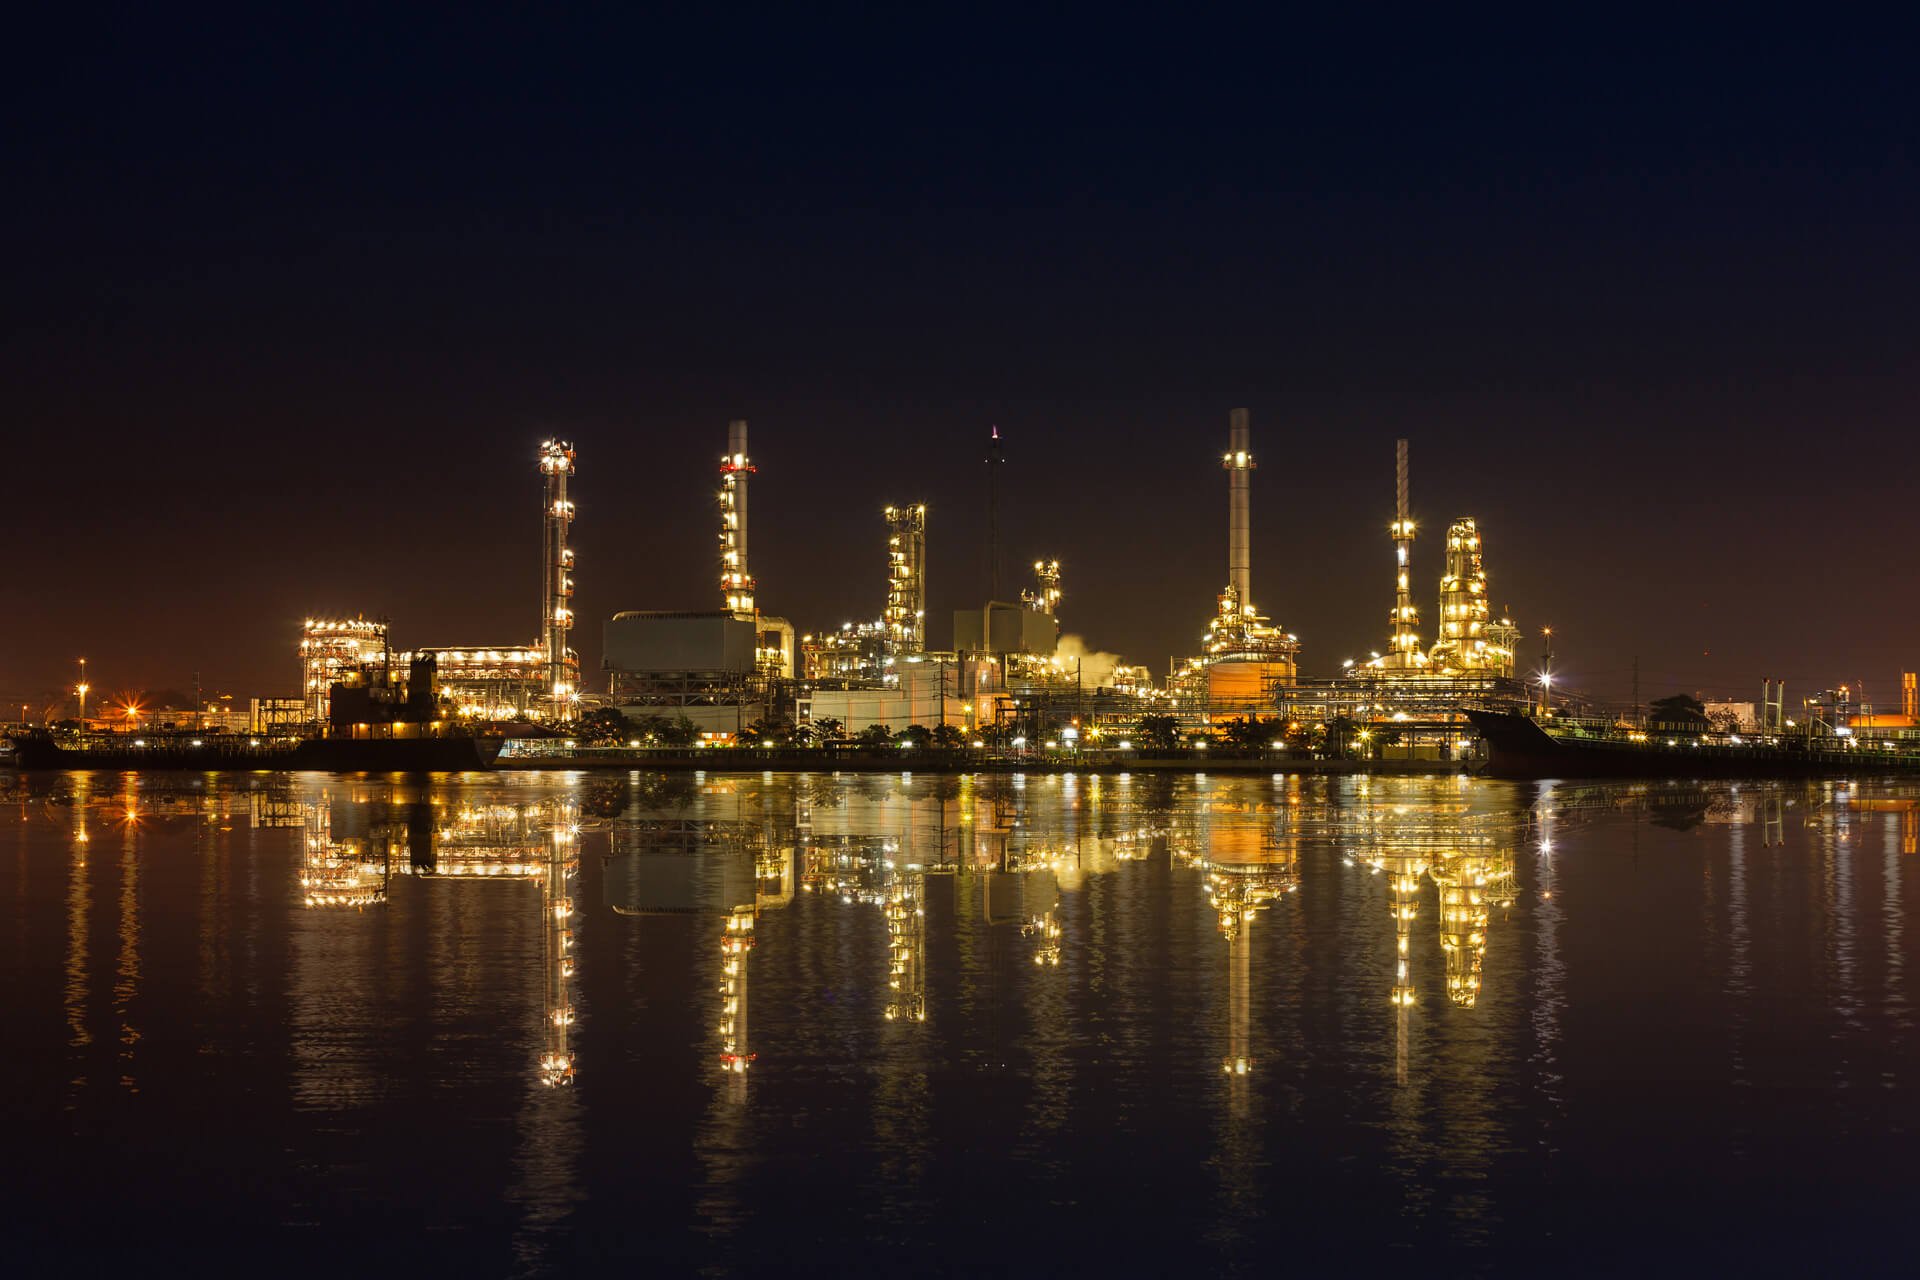 The Oil and Gas Industry uses ERA's software solutions.